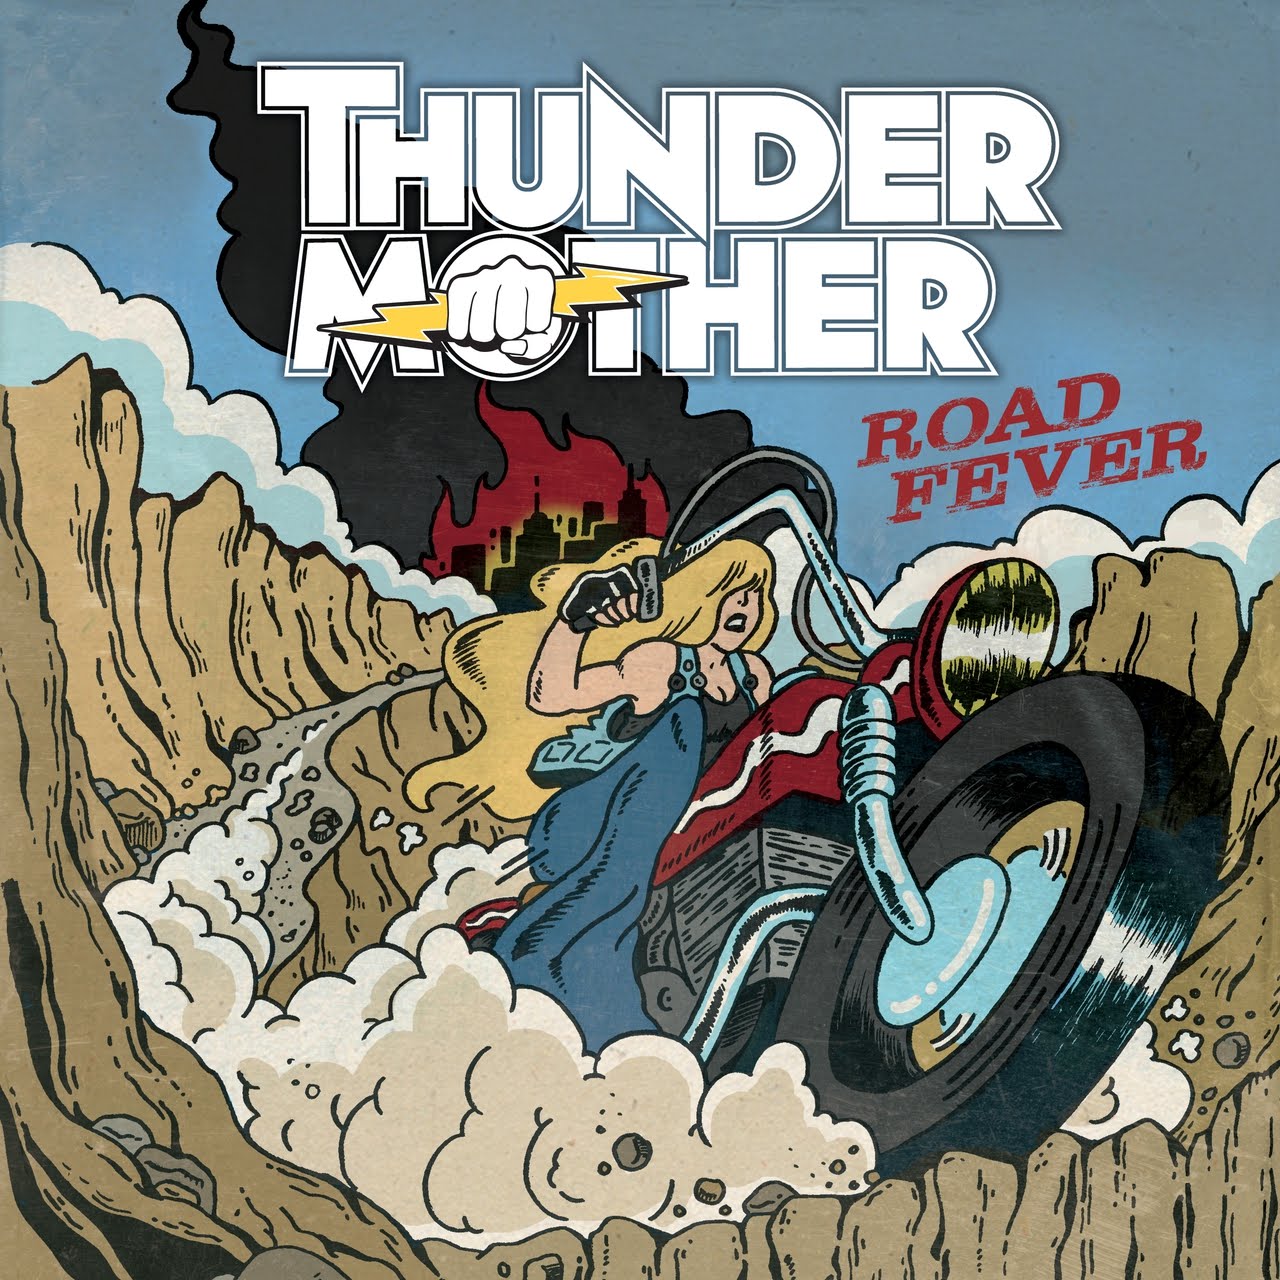 thundermother-road-fever-lp